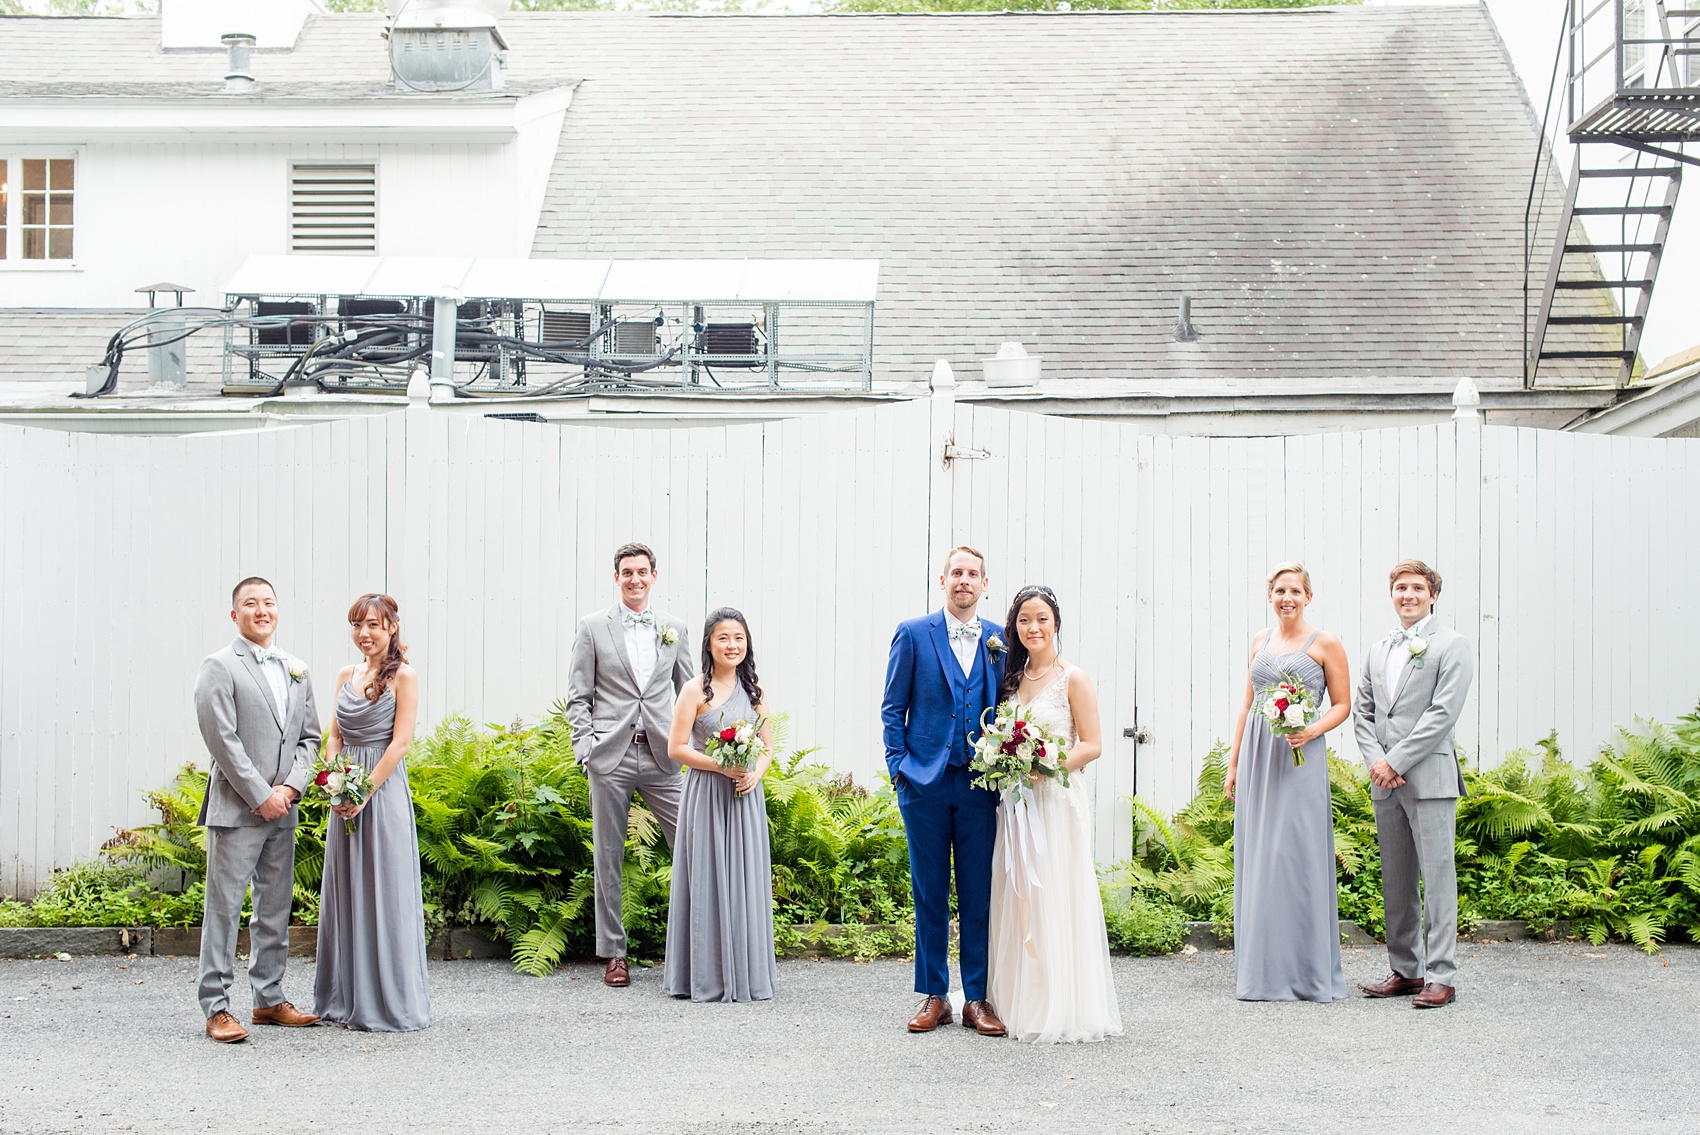 Wedding photos at Crabtree's Kittle House in Chappaqua, New York by Mikkel Paige Photography. This venue in Westchester county was the perfect place to capture their creative Vogue-like bridal party photo, with the bridesmaids in grey gowns and men in grey suits with matching pattern bow ties. The historic home is very close to NYC. Click through for more summer wedding inspiration from their day! #bluesuit #BHLDNgown #mikkelpaige #CrabtreesKittleHouse #WestchesterWeddingVenues #WestchesterWedding #AsianBride #summerwedding #brideandgroom #weddingparty #bridalparty #vogueweddingphotos